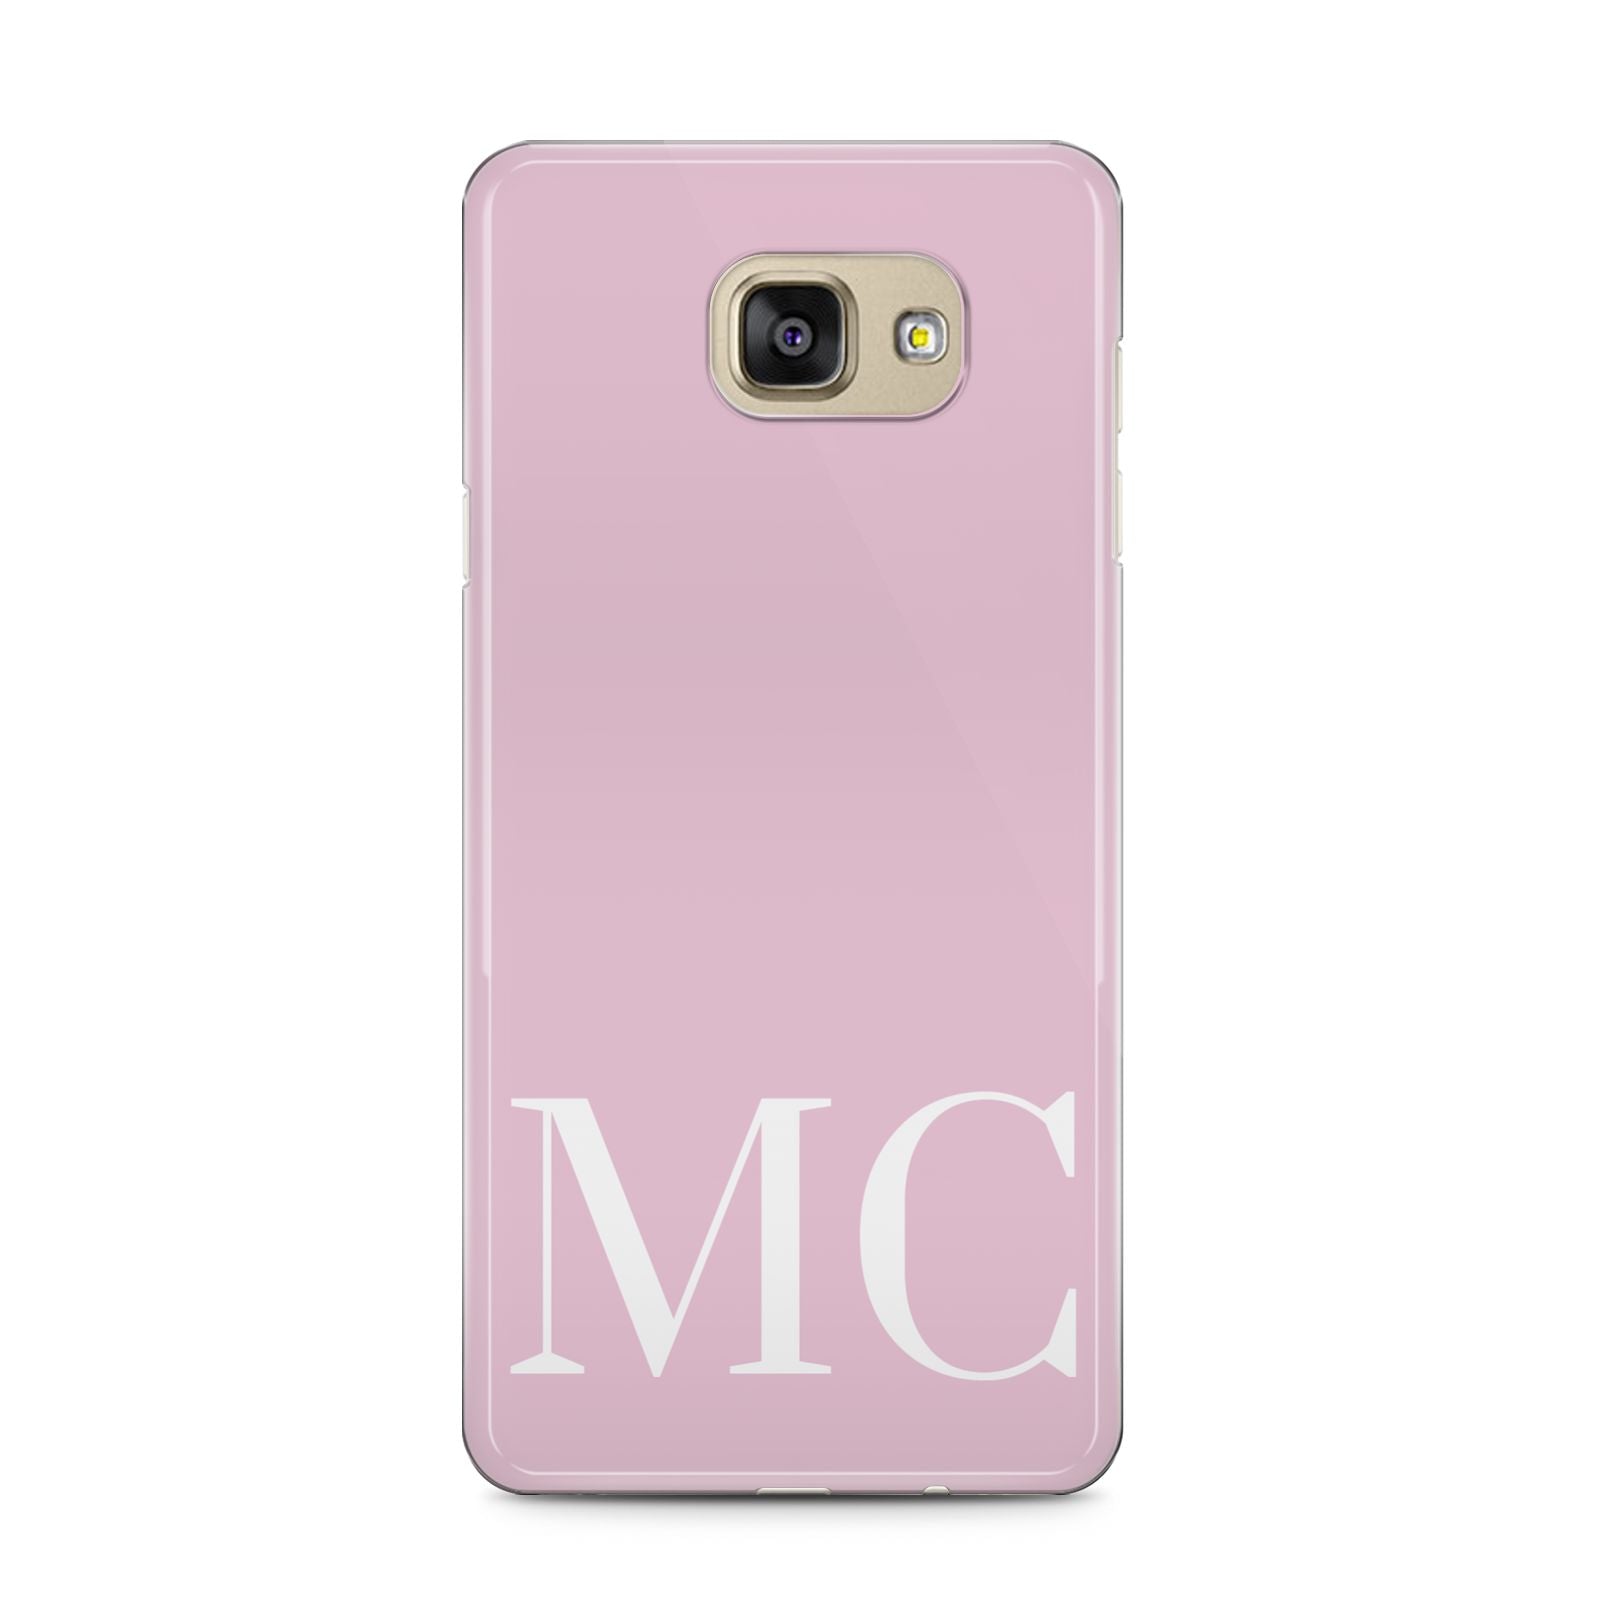 Initials Personalised 2 Samsung Galaxy A5 2016 Case on gold phone